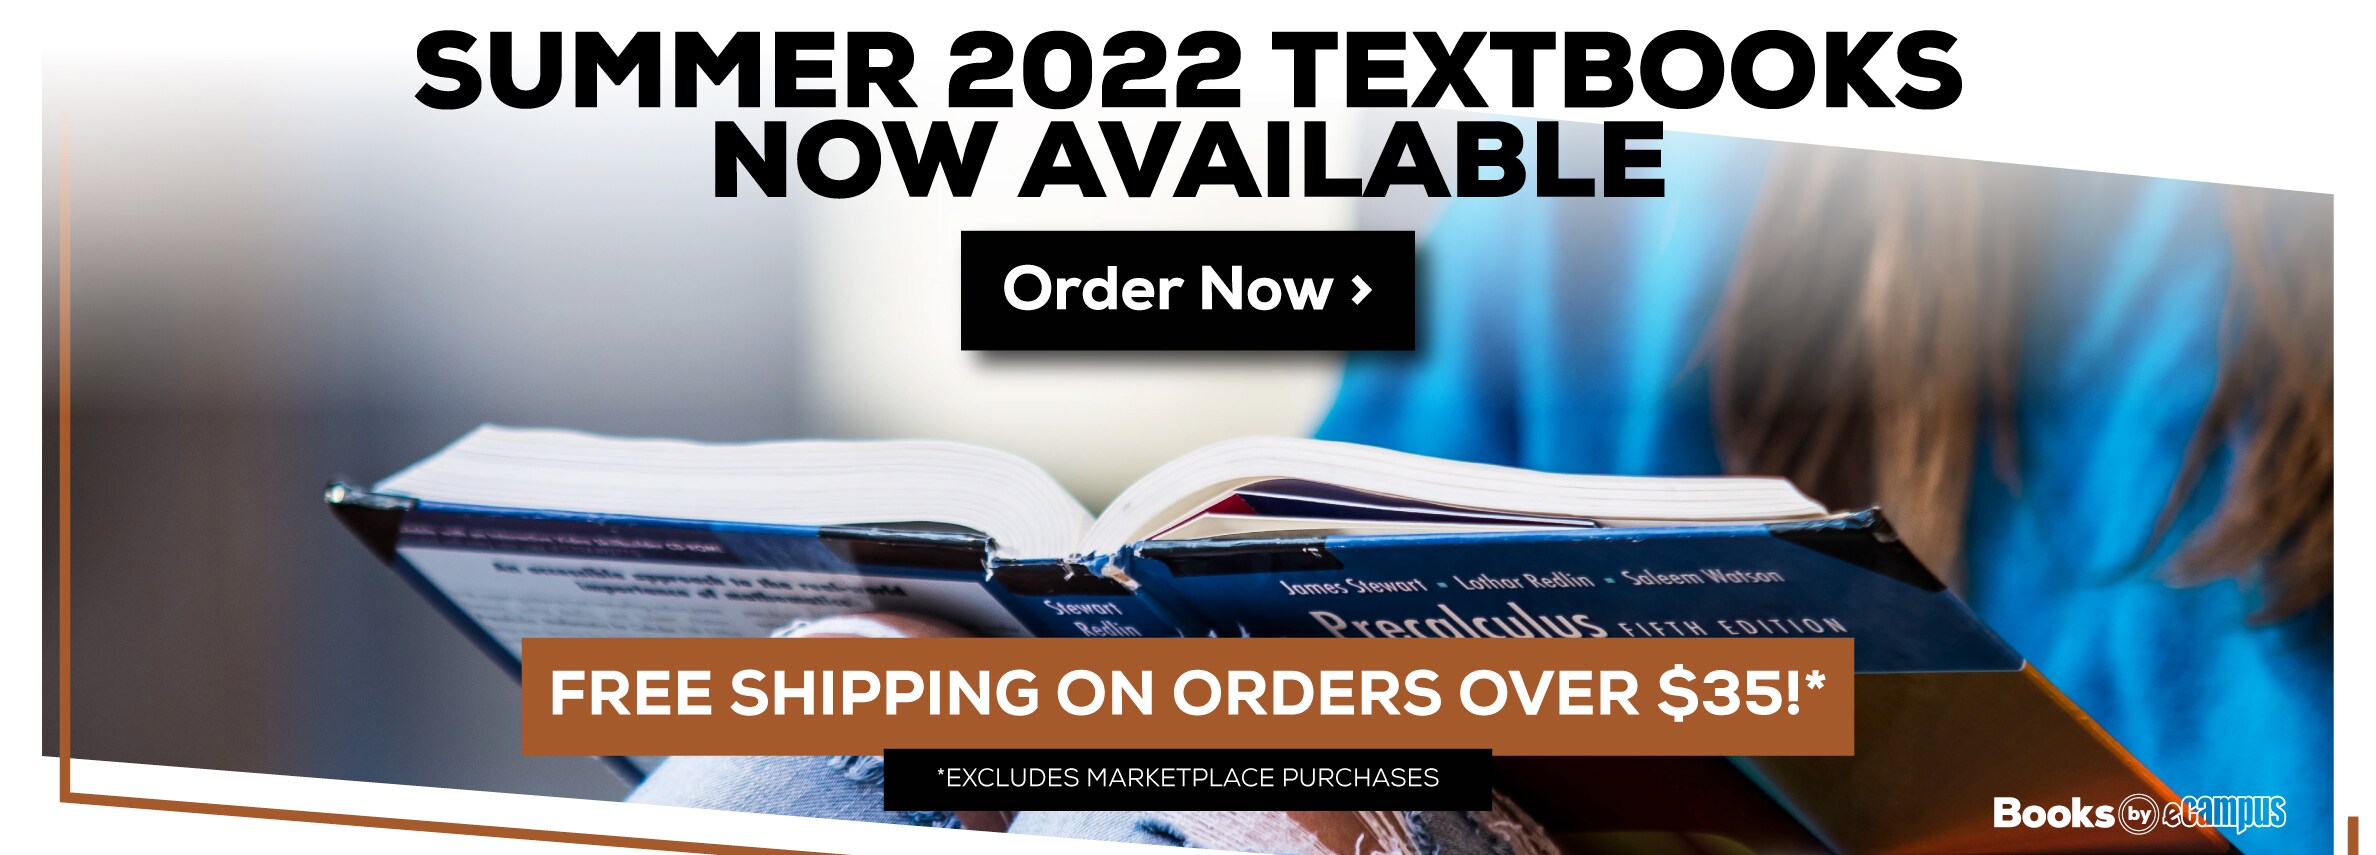 Textbooks Now Available. Free shipping on all orders over $35! Excludes marketplace purchases. Order Now